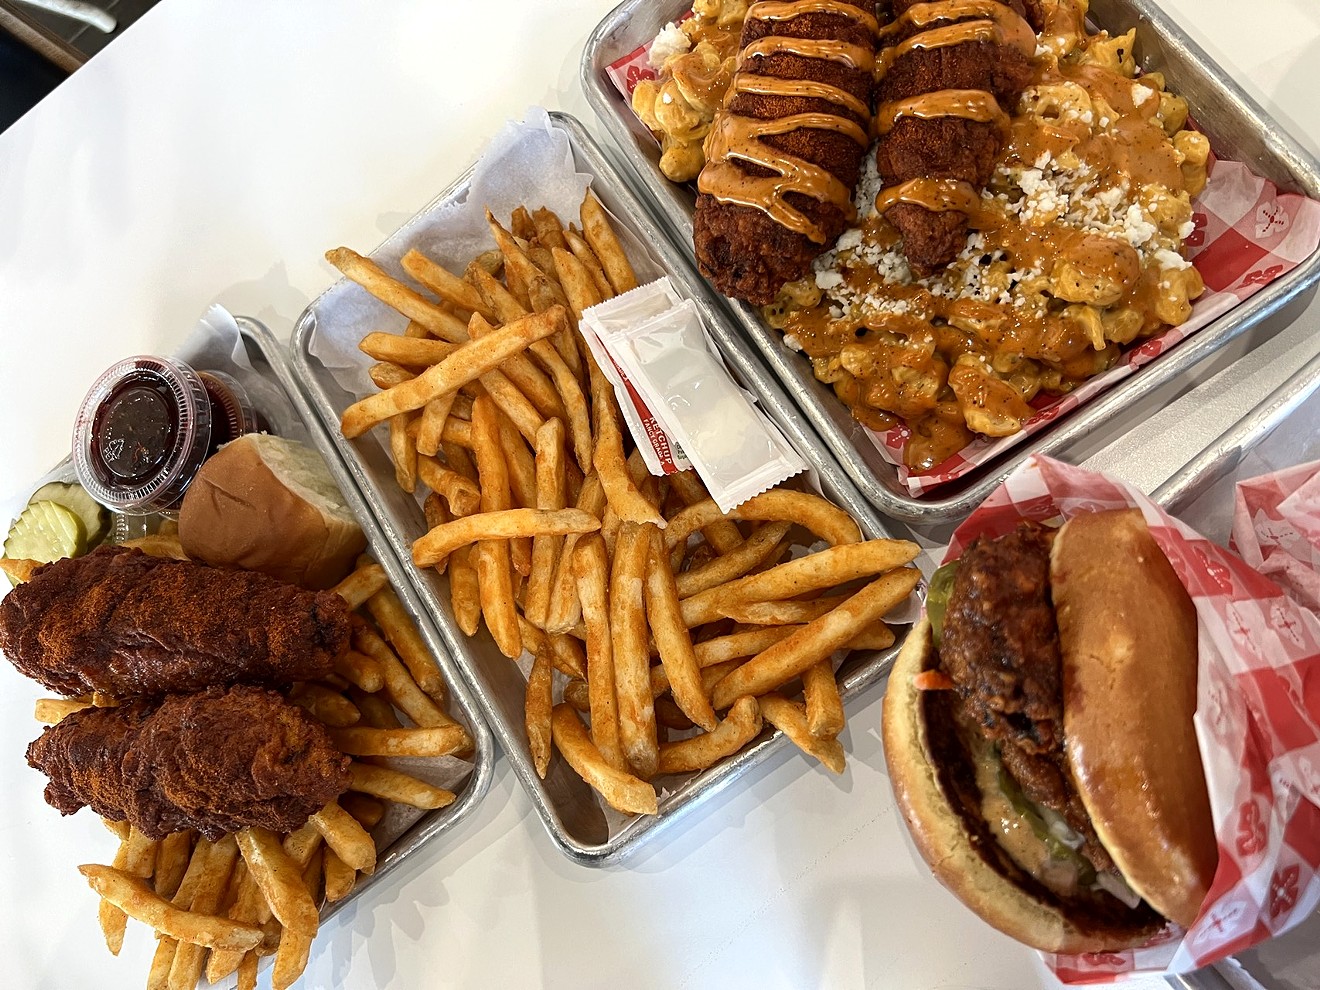 Some of the options at Twist are the Hot Chicken sandwich, Hot Nashville Mac, Hot Tenders, and seasoned fries.